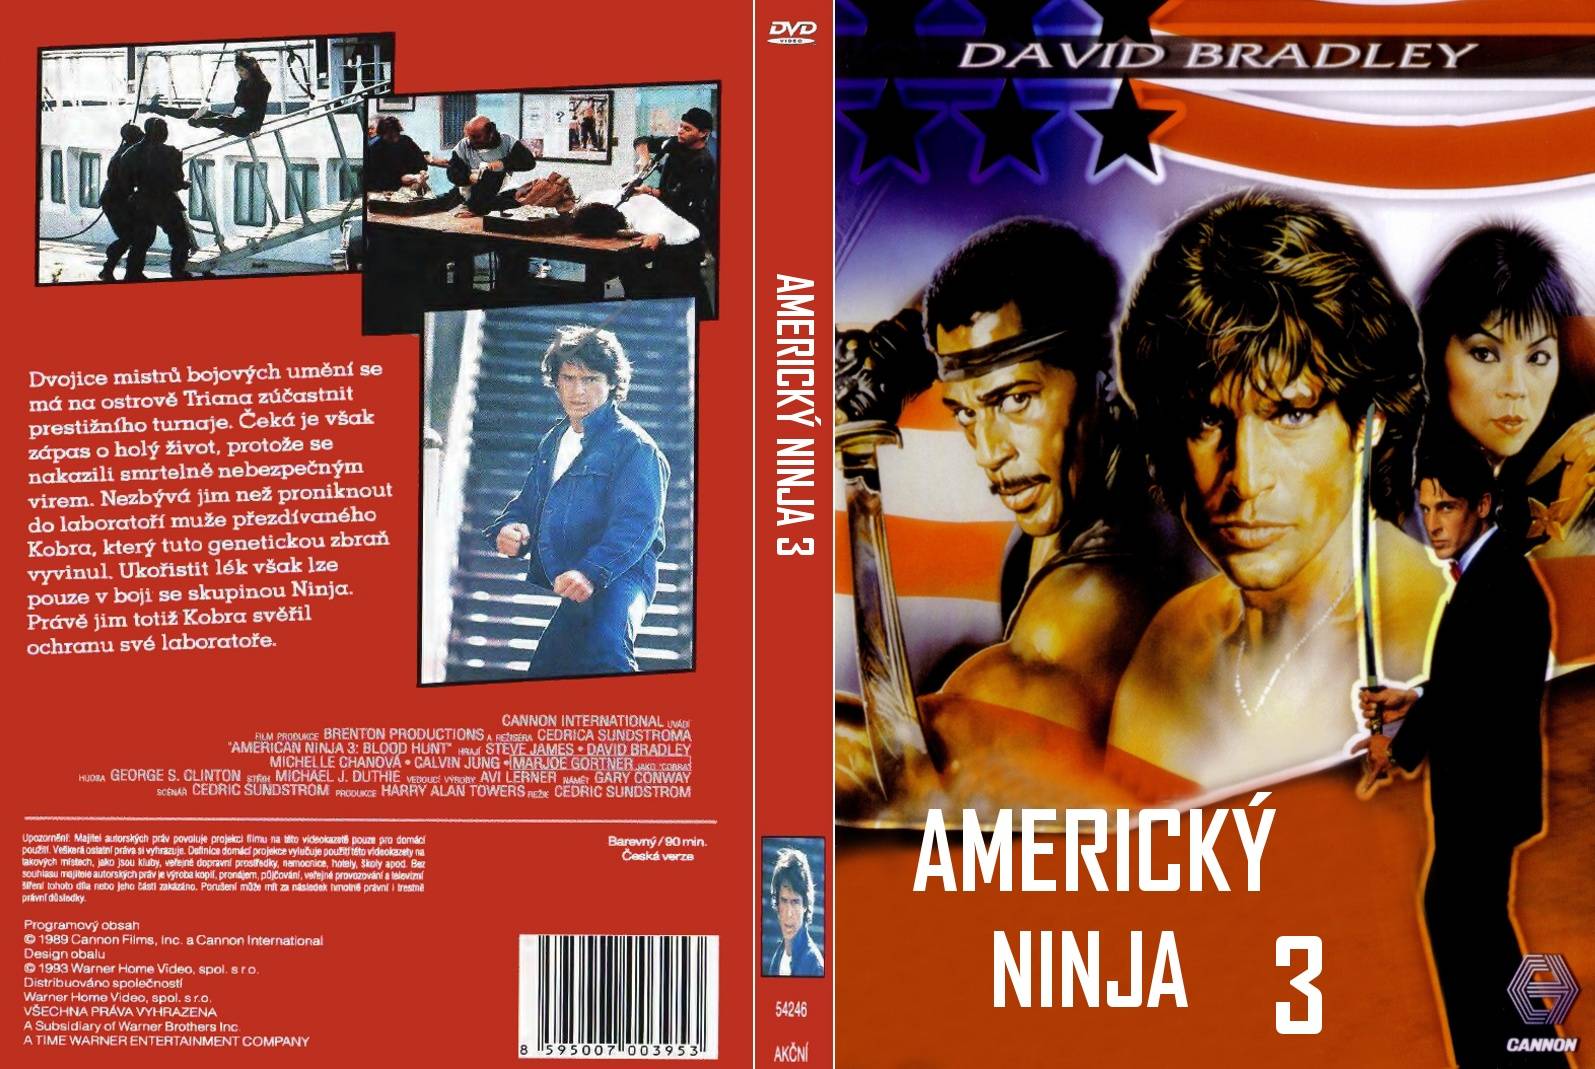 5 Movies - American Ninja 1-5 DVD 1 2 3 4 5 - The Confrontation/Blood  Hunt/The Annihilation/V - Complete Collection Set